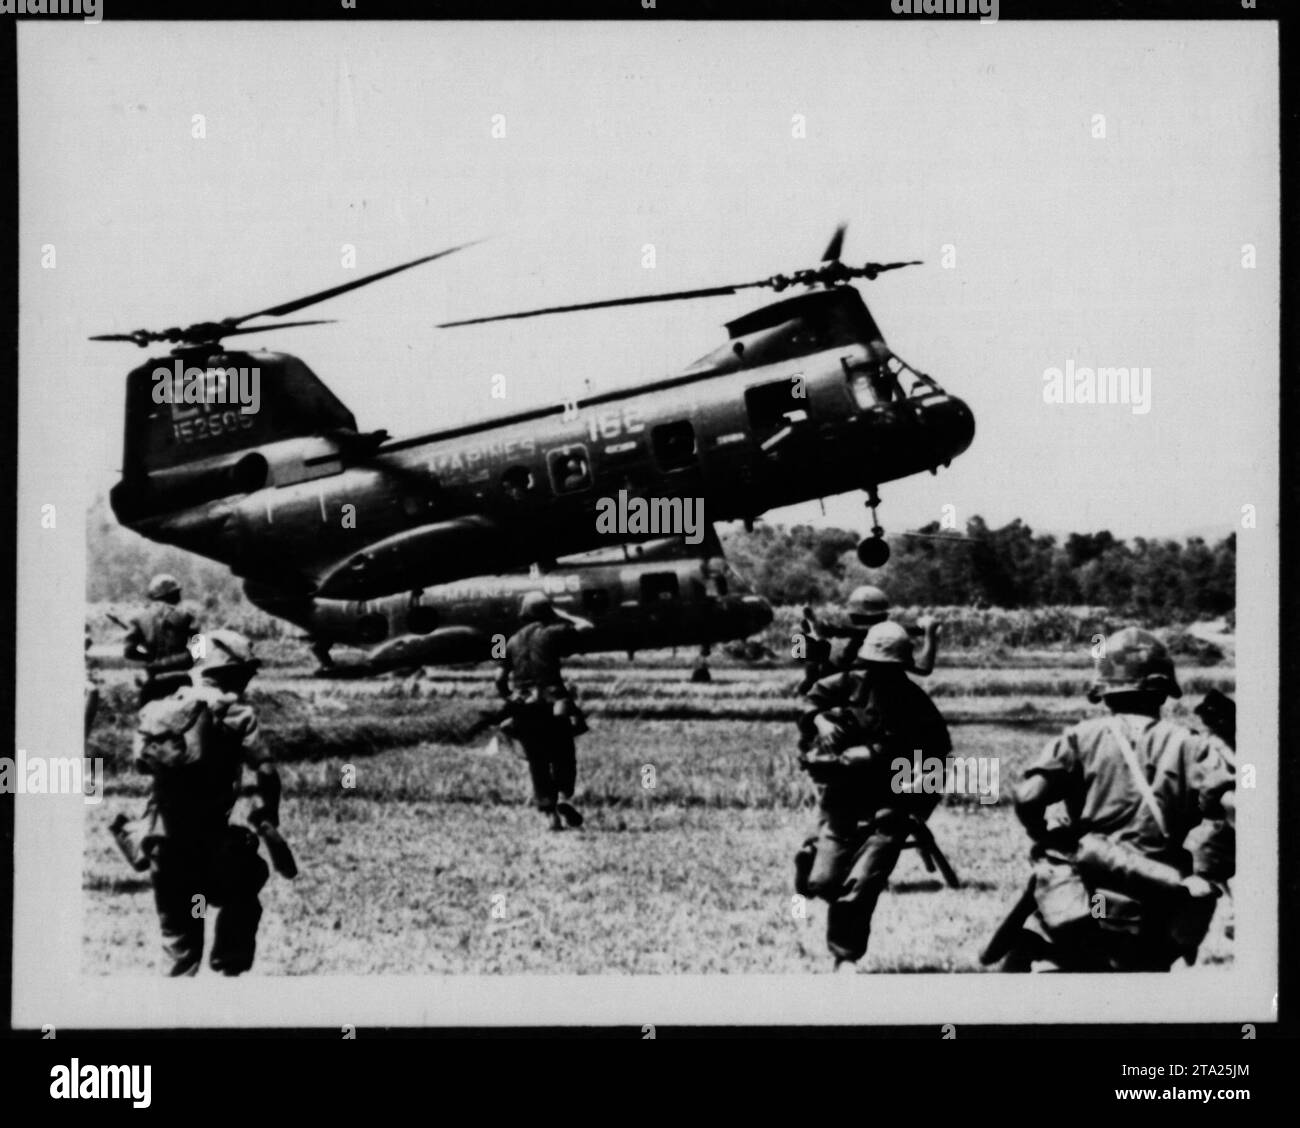 Two CH-46 helicopters hover above a jungle clearing during the Vietnam War. The helicopters, robustly constructed, were widely used by the American military during the conflict for troop and supply transportation. This photograph captures the operational deployment of these aircraft and provides a glimpse into the chaotic environment of Vietnam. Stock Photo